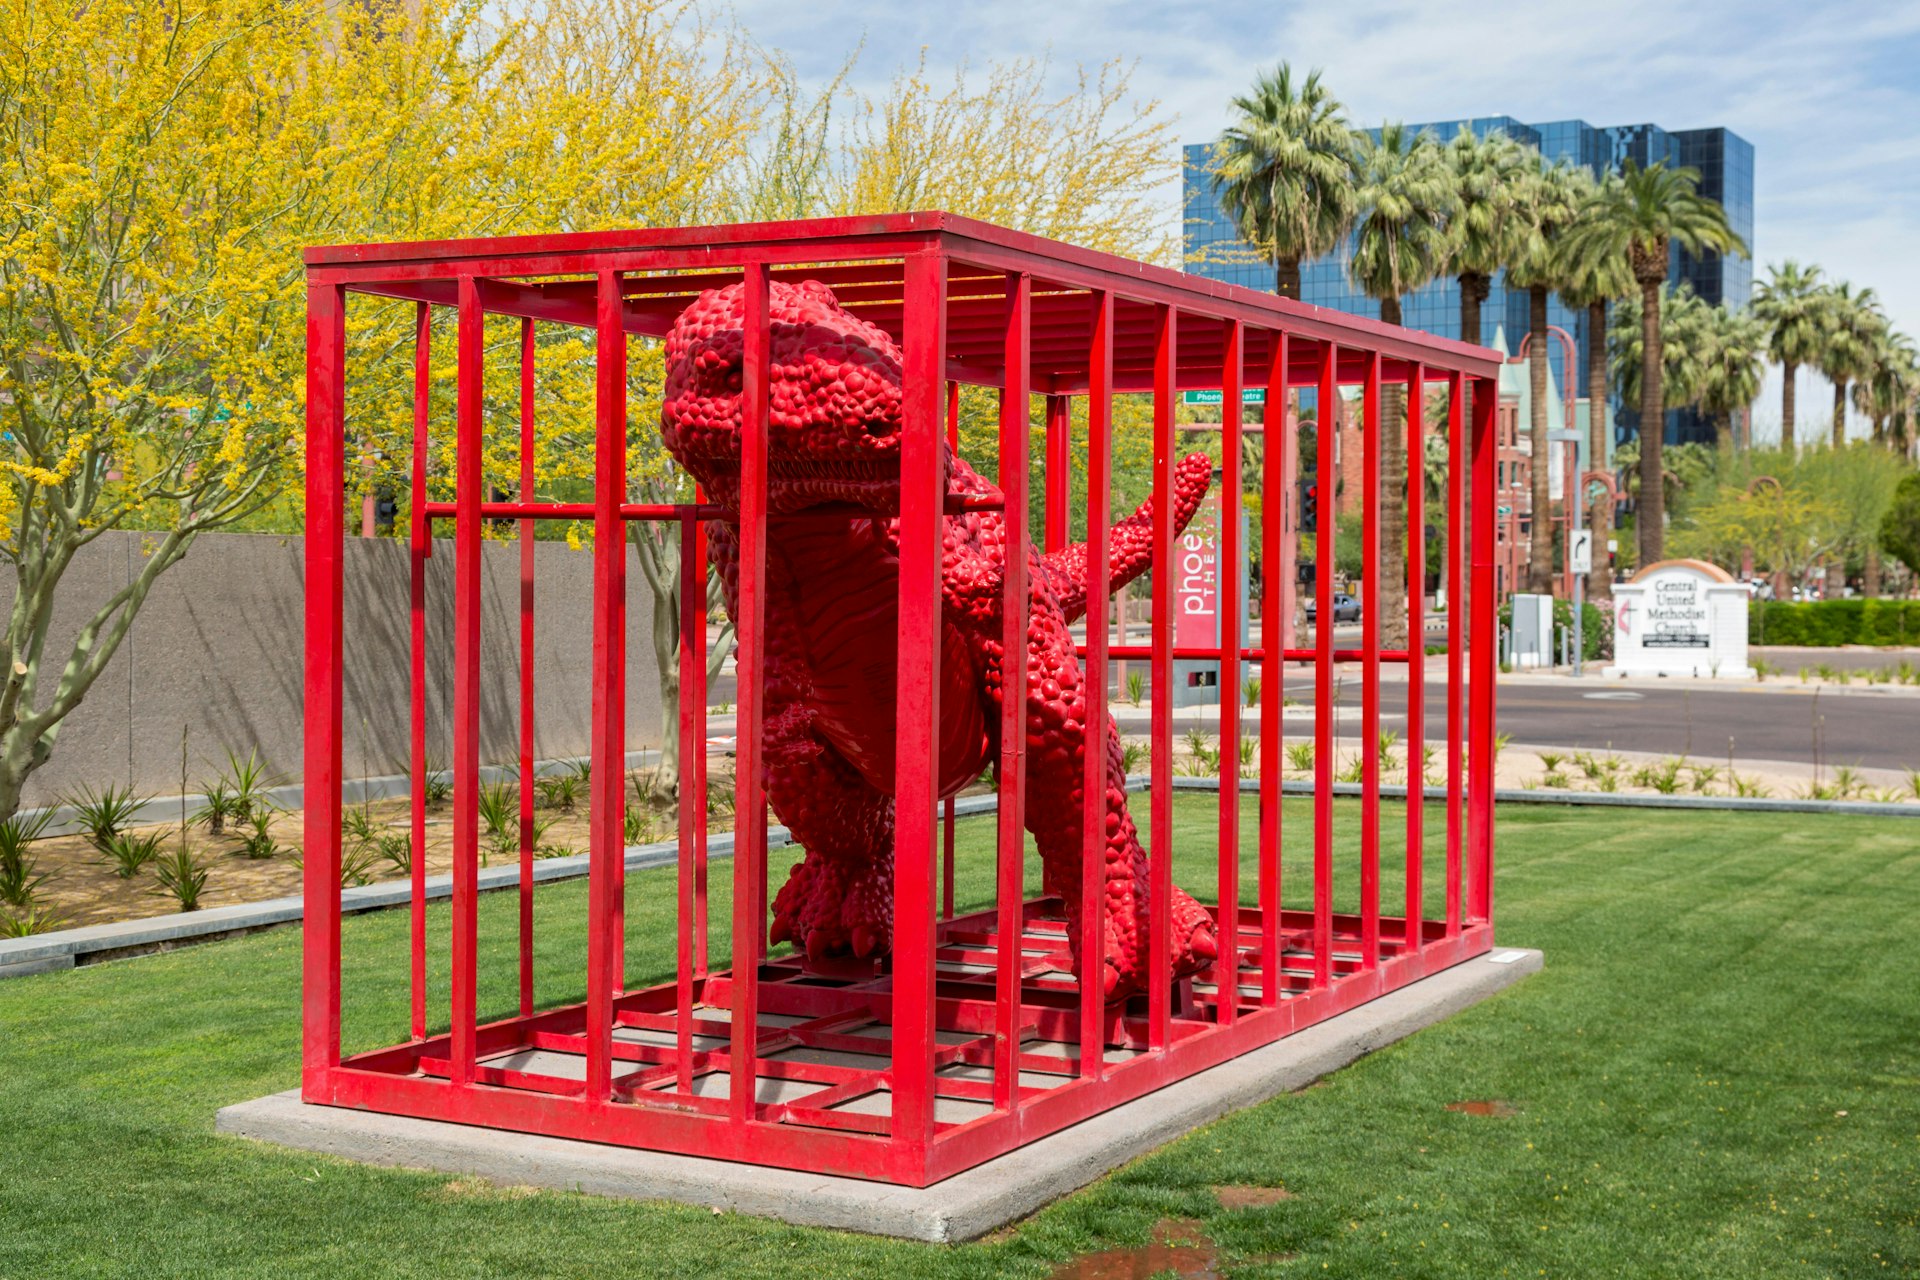 Phoenix, Arizona - A red dinosaur in a red cage at the Phoenix Art Museum.